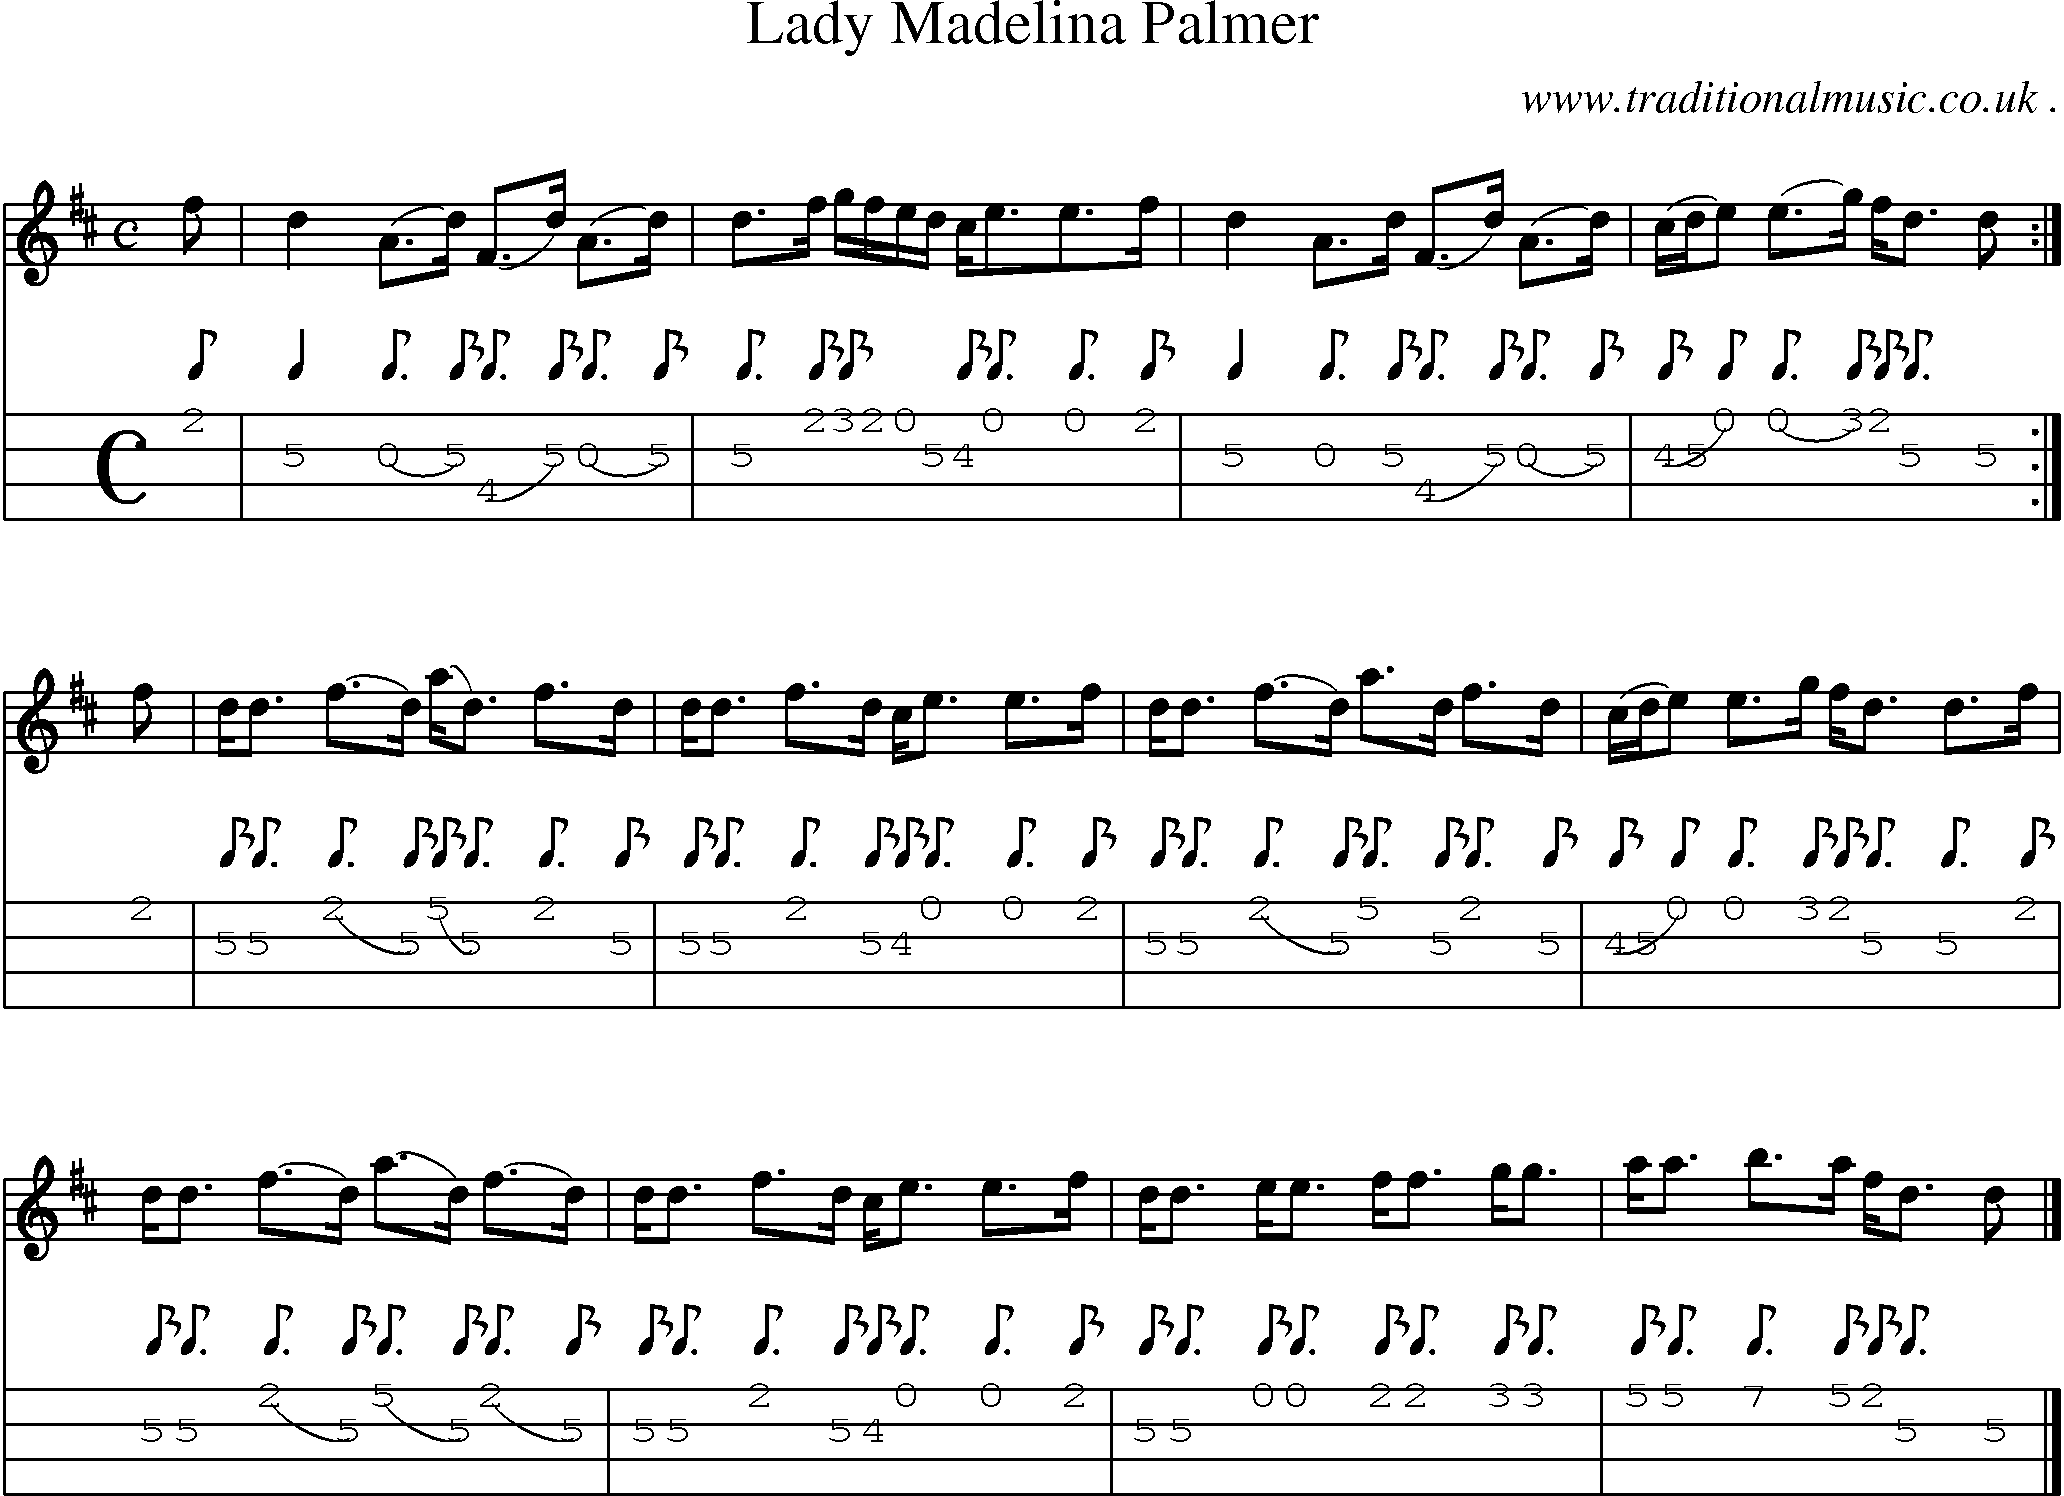 Sheet-music  score, Chords and Mandolin Tabs for Lady Madelina Palmer